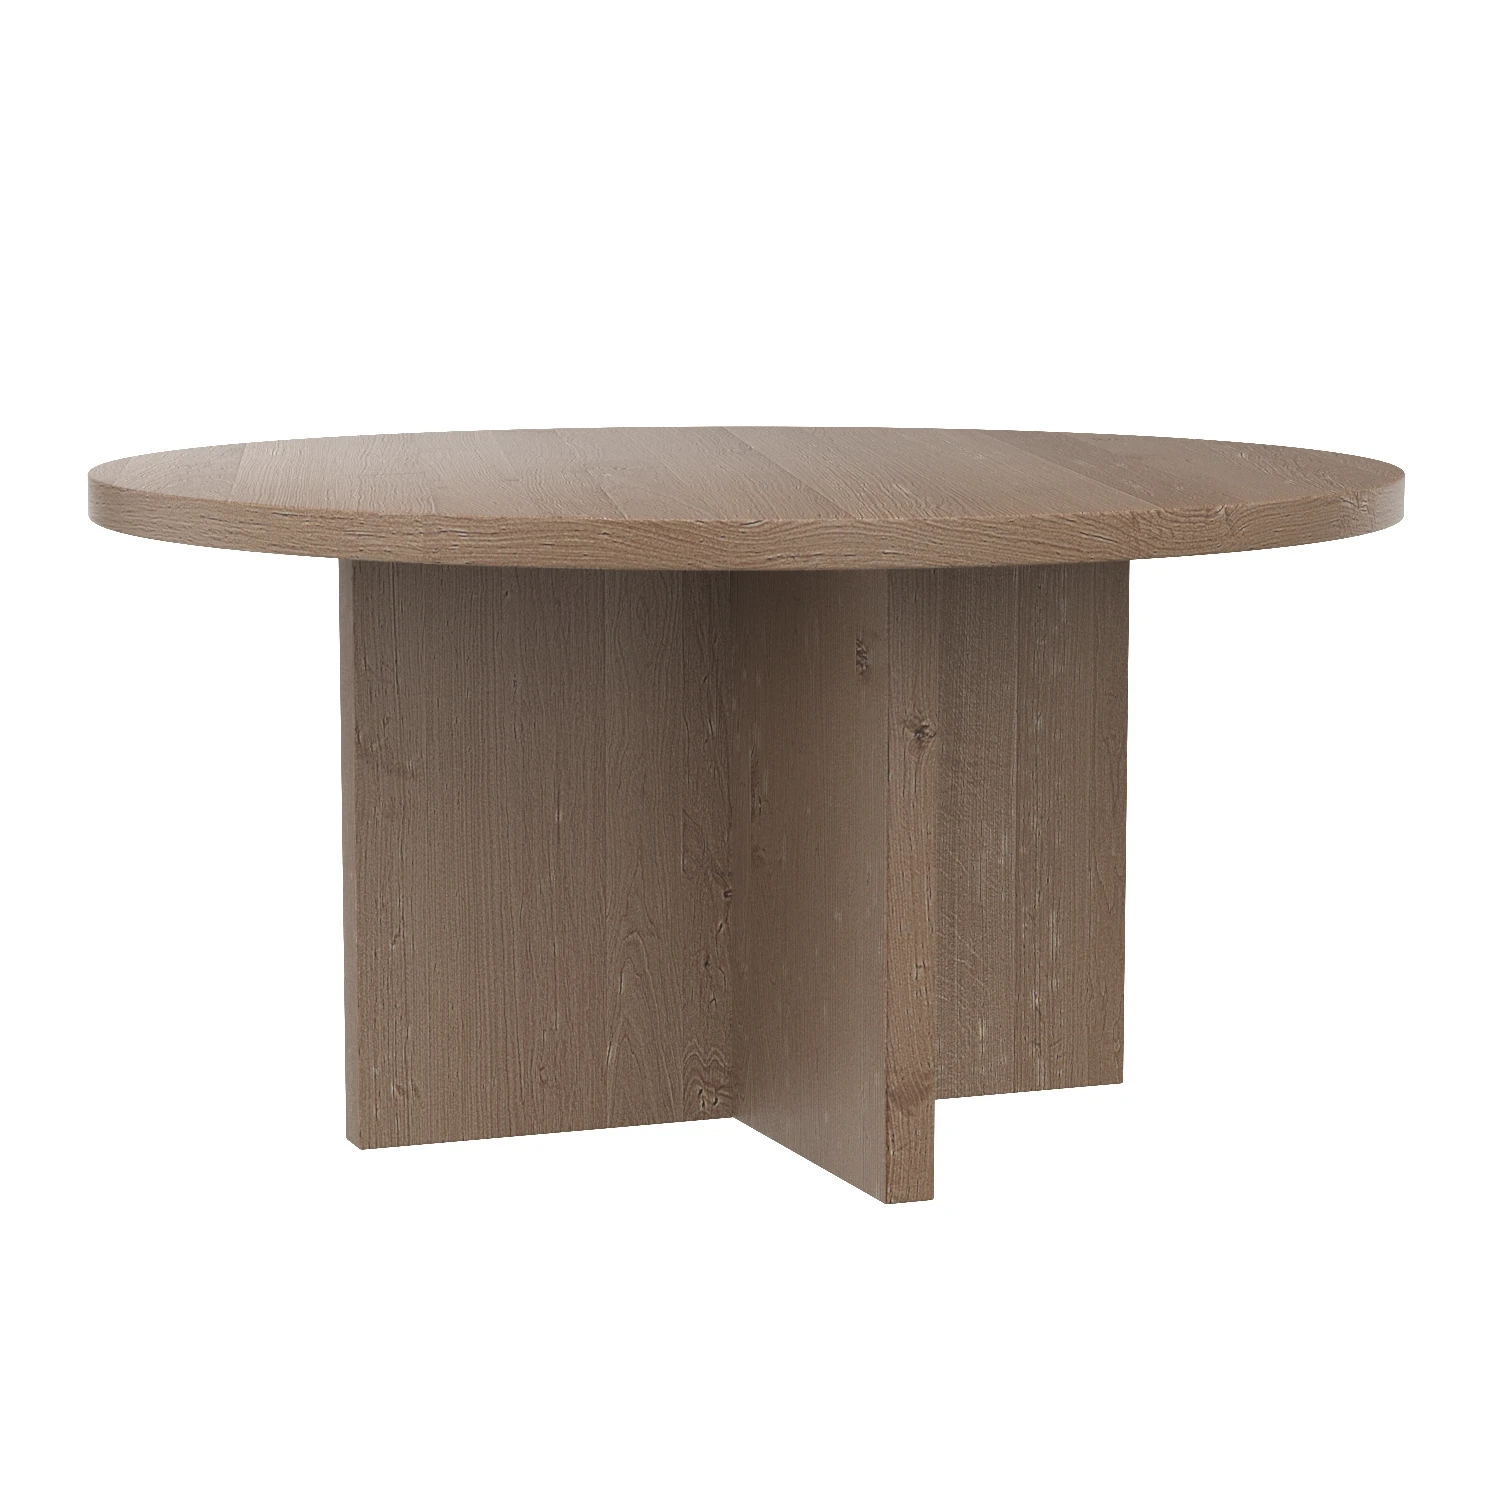 Harley Round Dining Table 3D Model_01